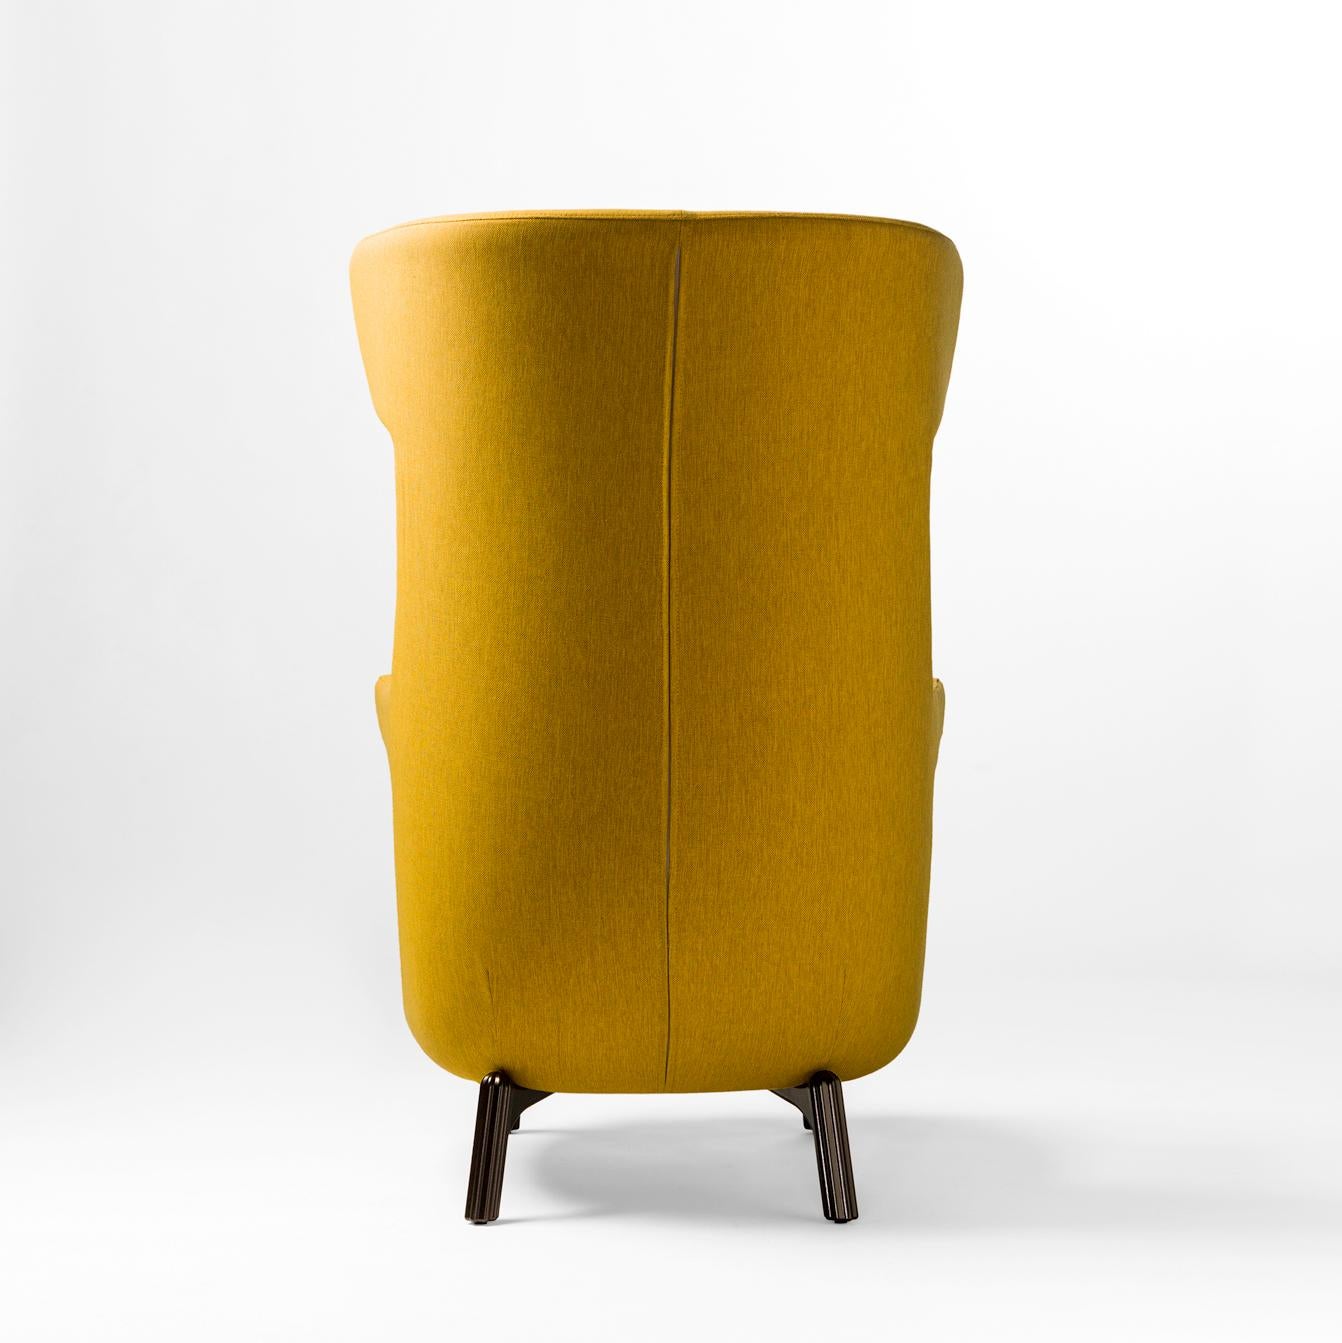 Modern Jaime Hayon, Monocolor in Yellow Fabric Upholstery Dino Armchair For Sale